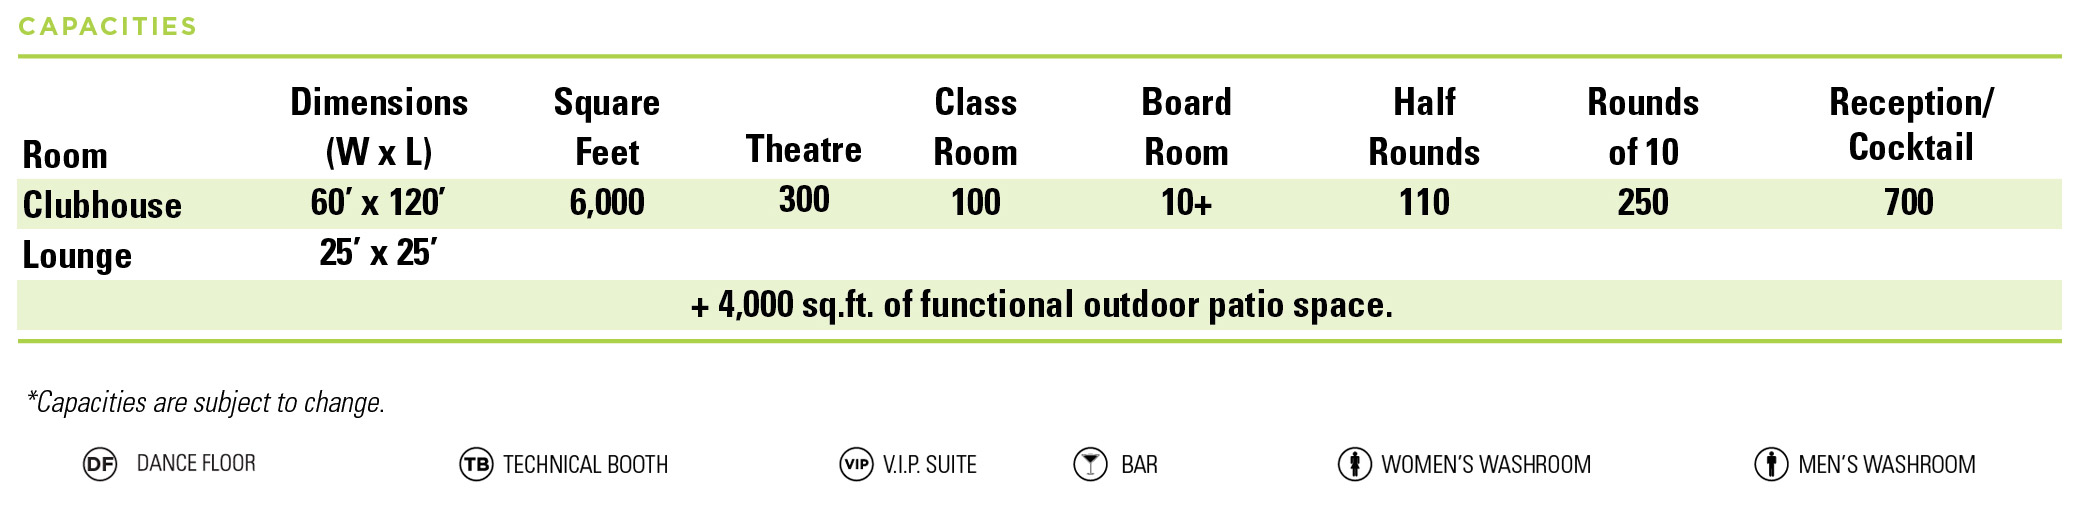 Clubhouse Eventspace Diagram 3